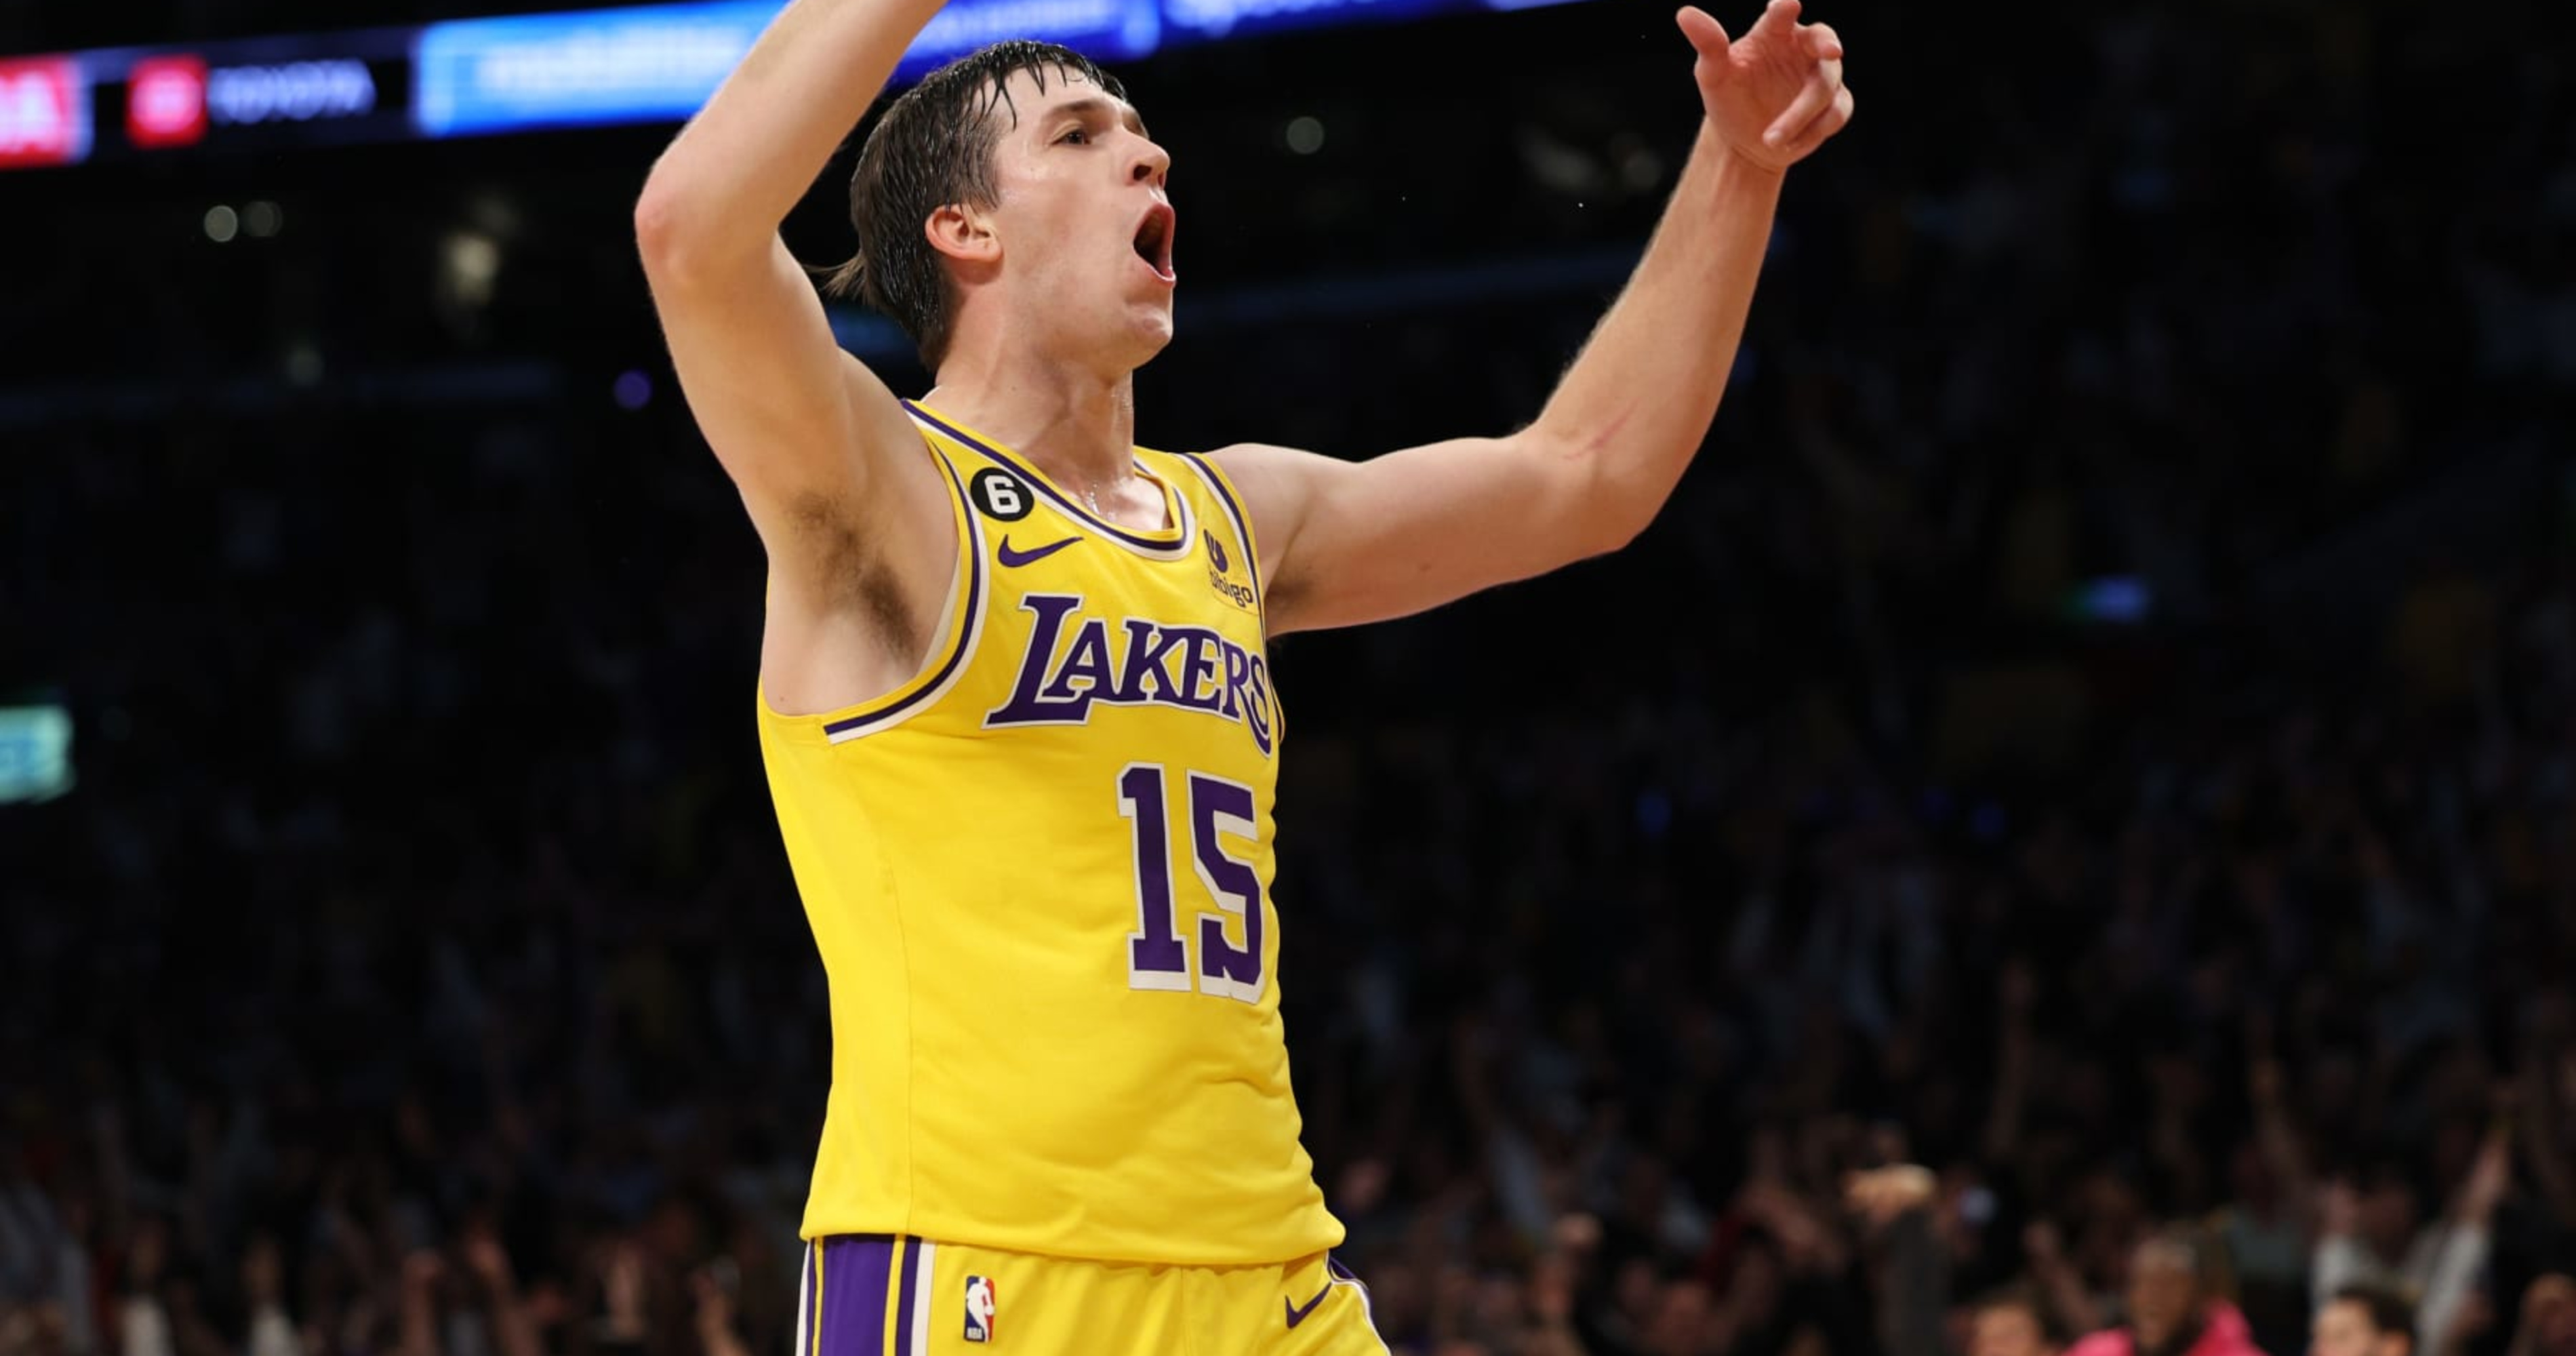 Is Lakers' Austin Reaves turning into a star?